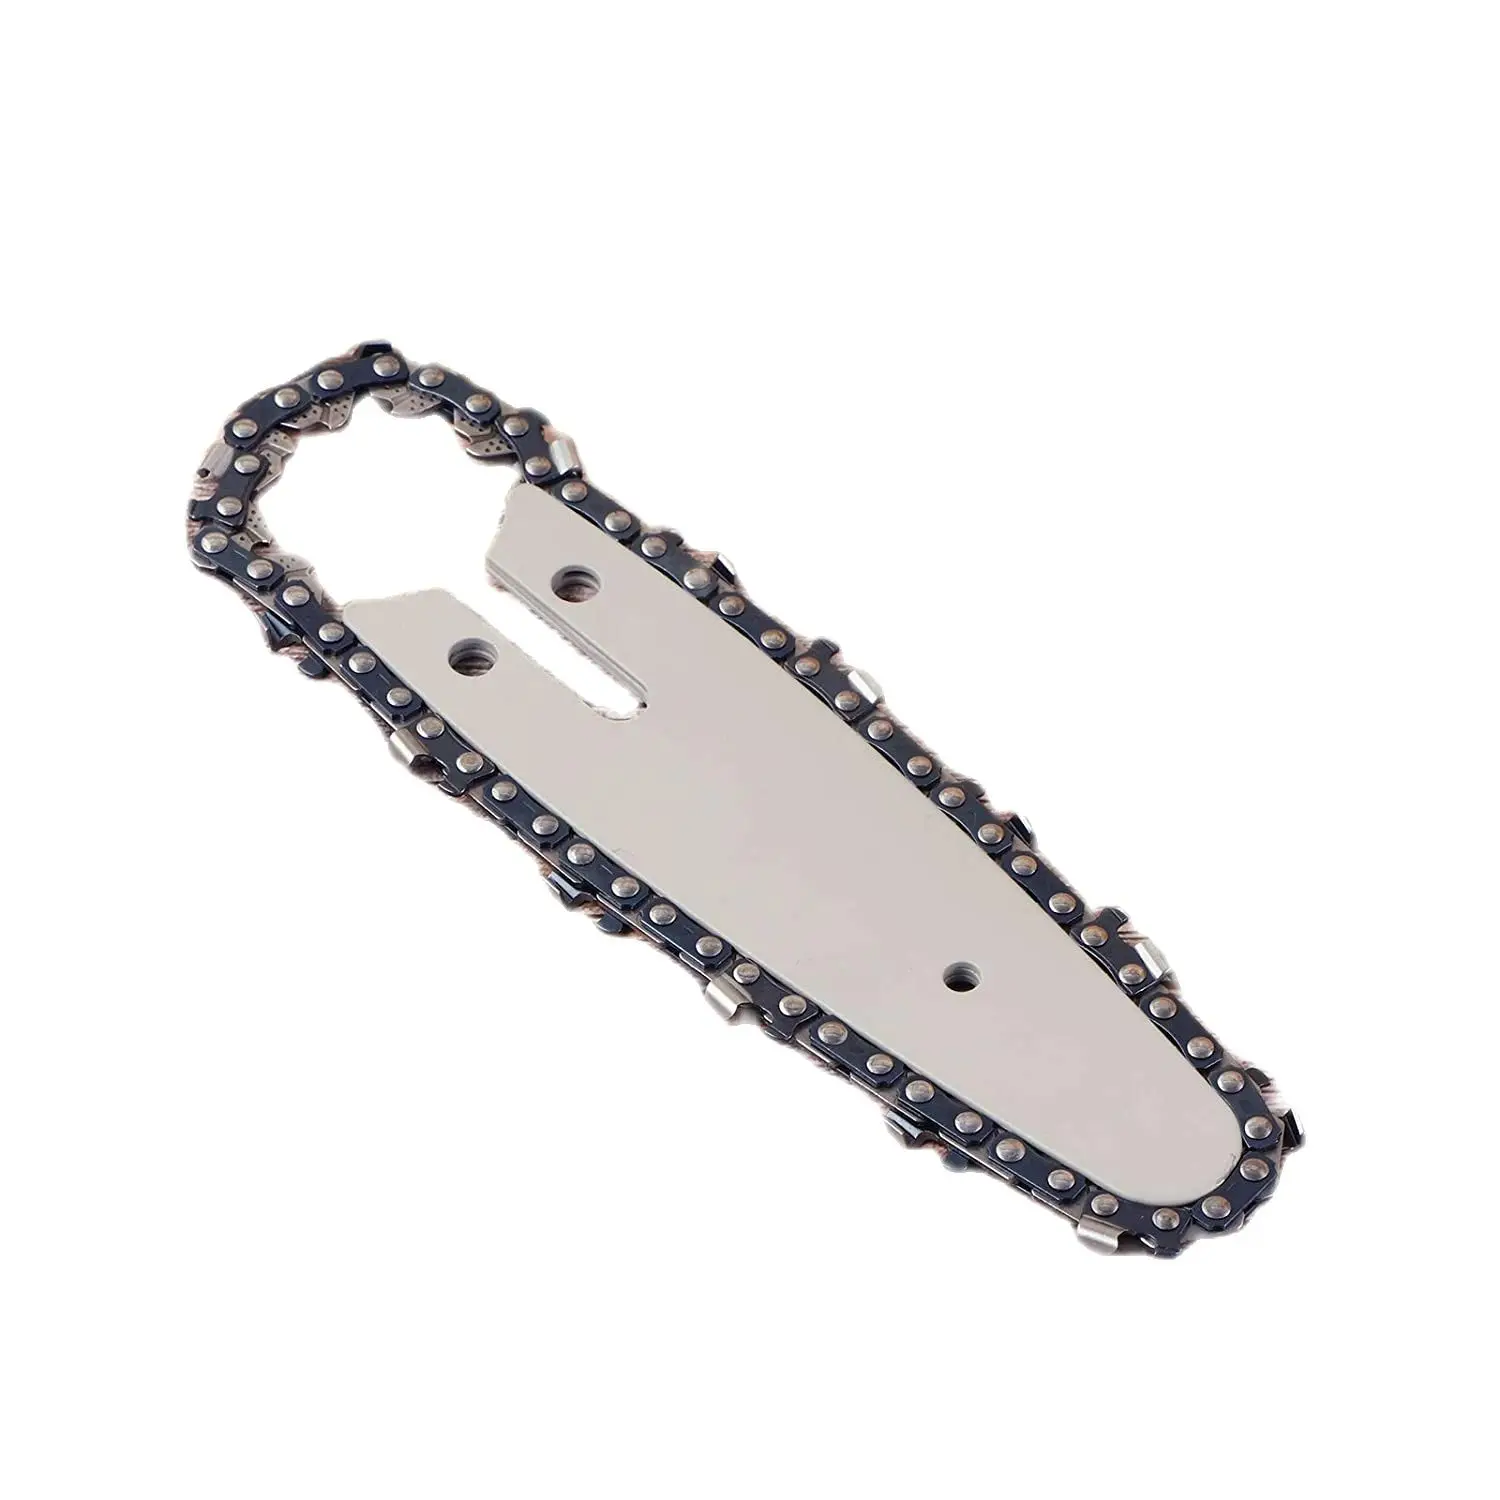 

4-inch Electric Chain Saw Woodworking Tool 13cm Guide Plate Chainsaw Accessory Replacement Chain for Electric Pruning Garden